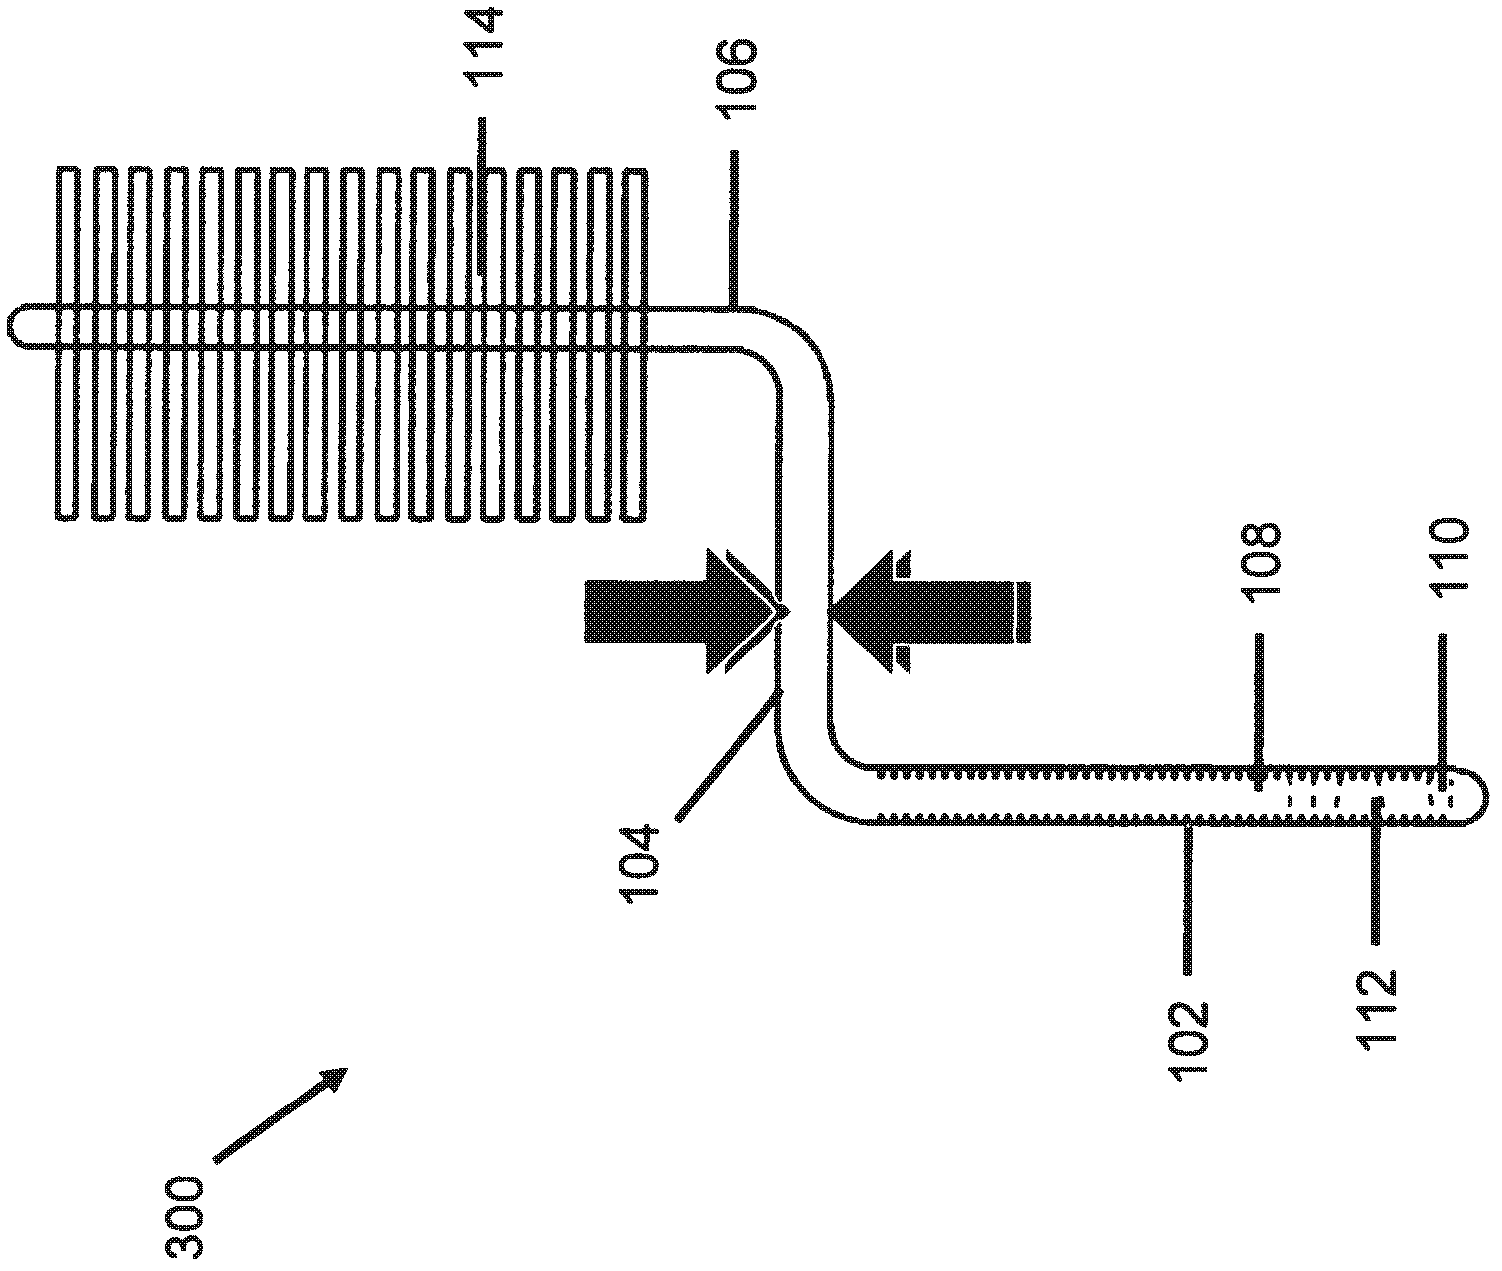 Heat pipes and thermoelectric cooling devices